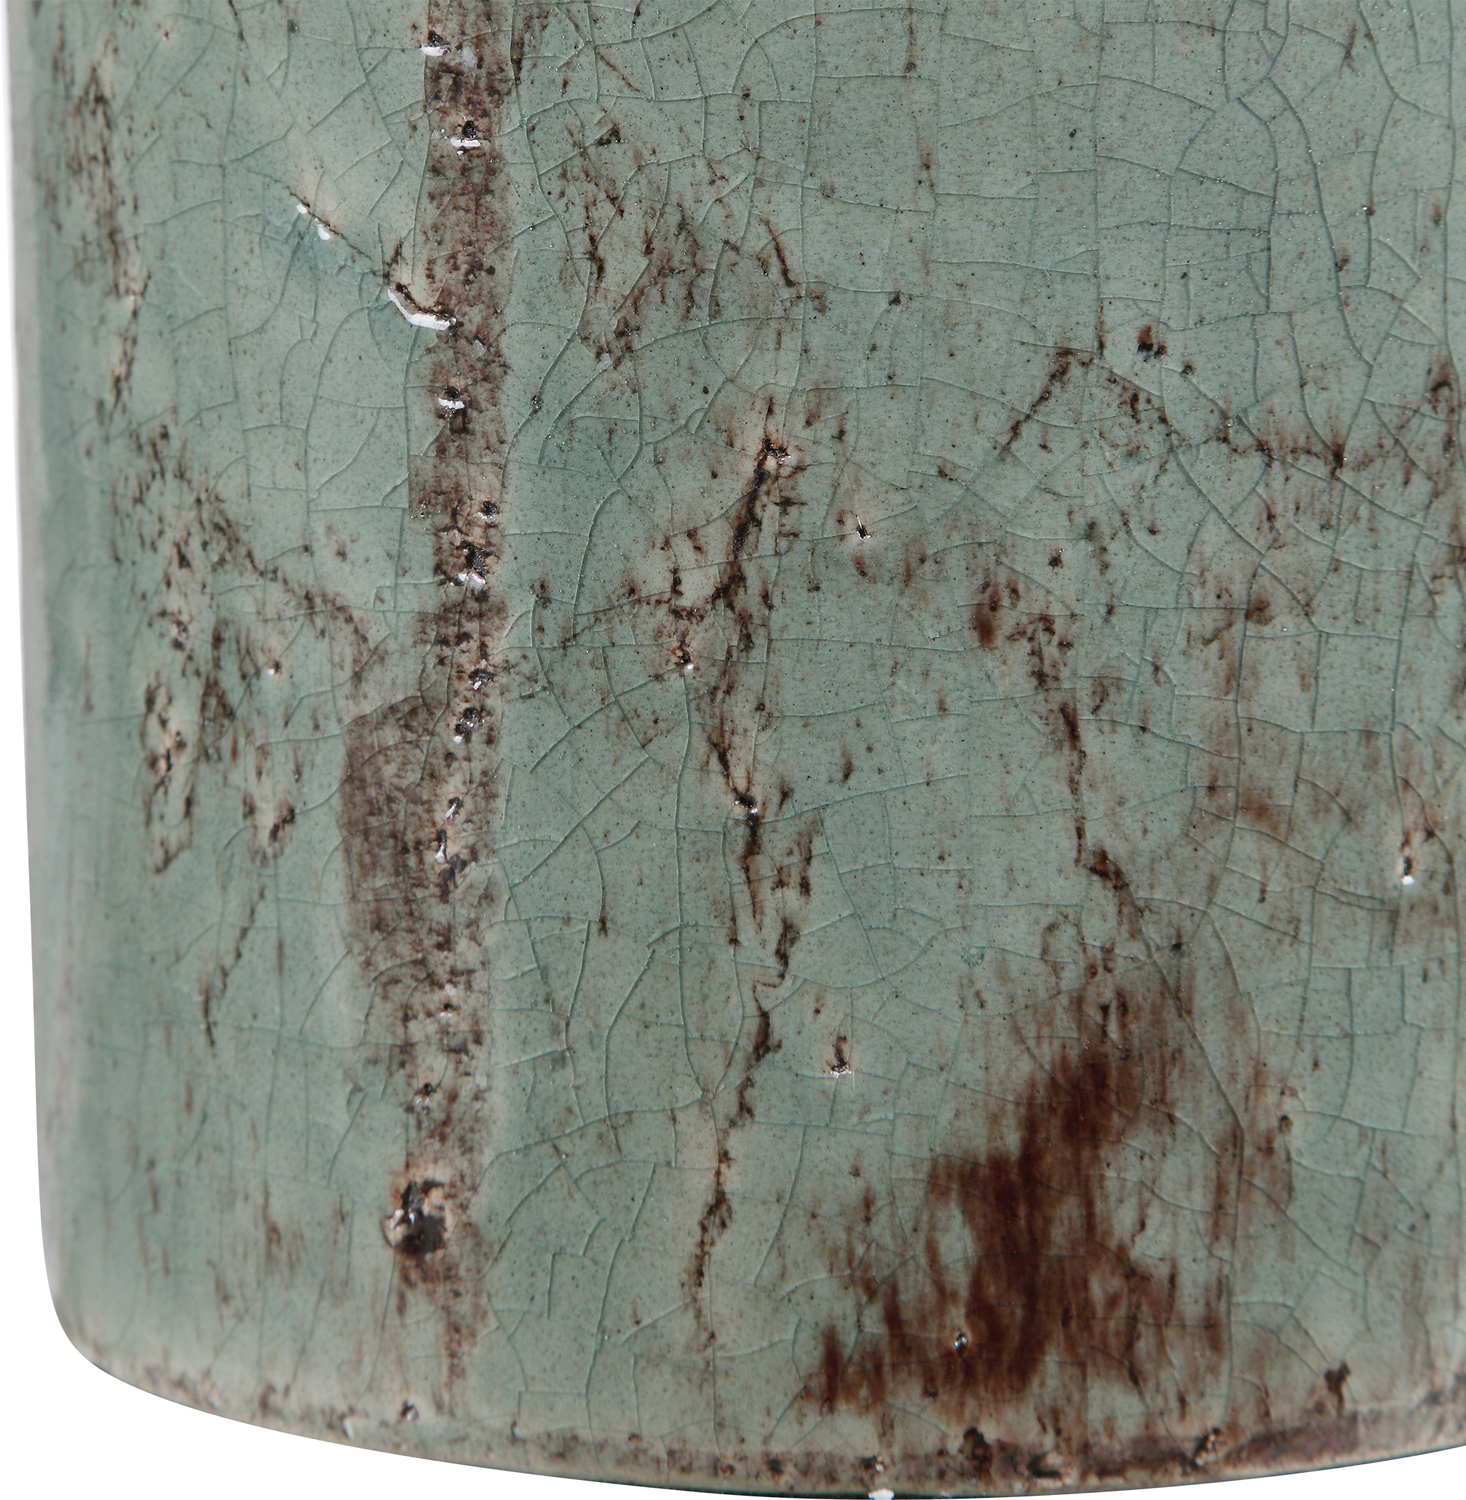 small gold table lamp Uttermost Crackled Aqua Table Lamp Ceramic Table Lamp Finished In A Crackled Aqua Blue Glaze With Dark Rustic Bronze Distressing, Accented With Light Antique Brushed Brass Details.